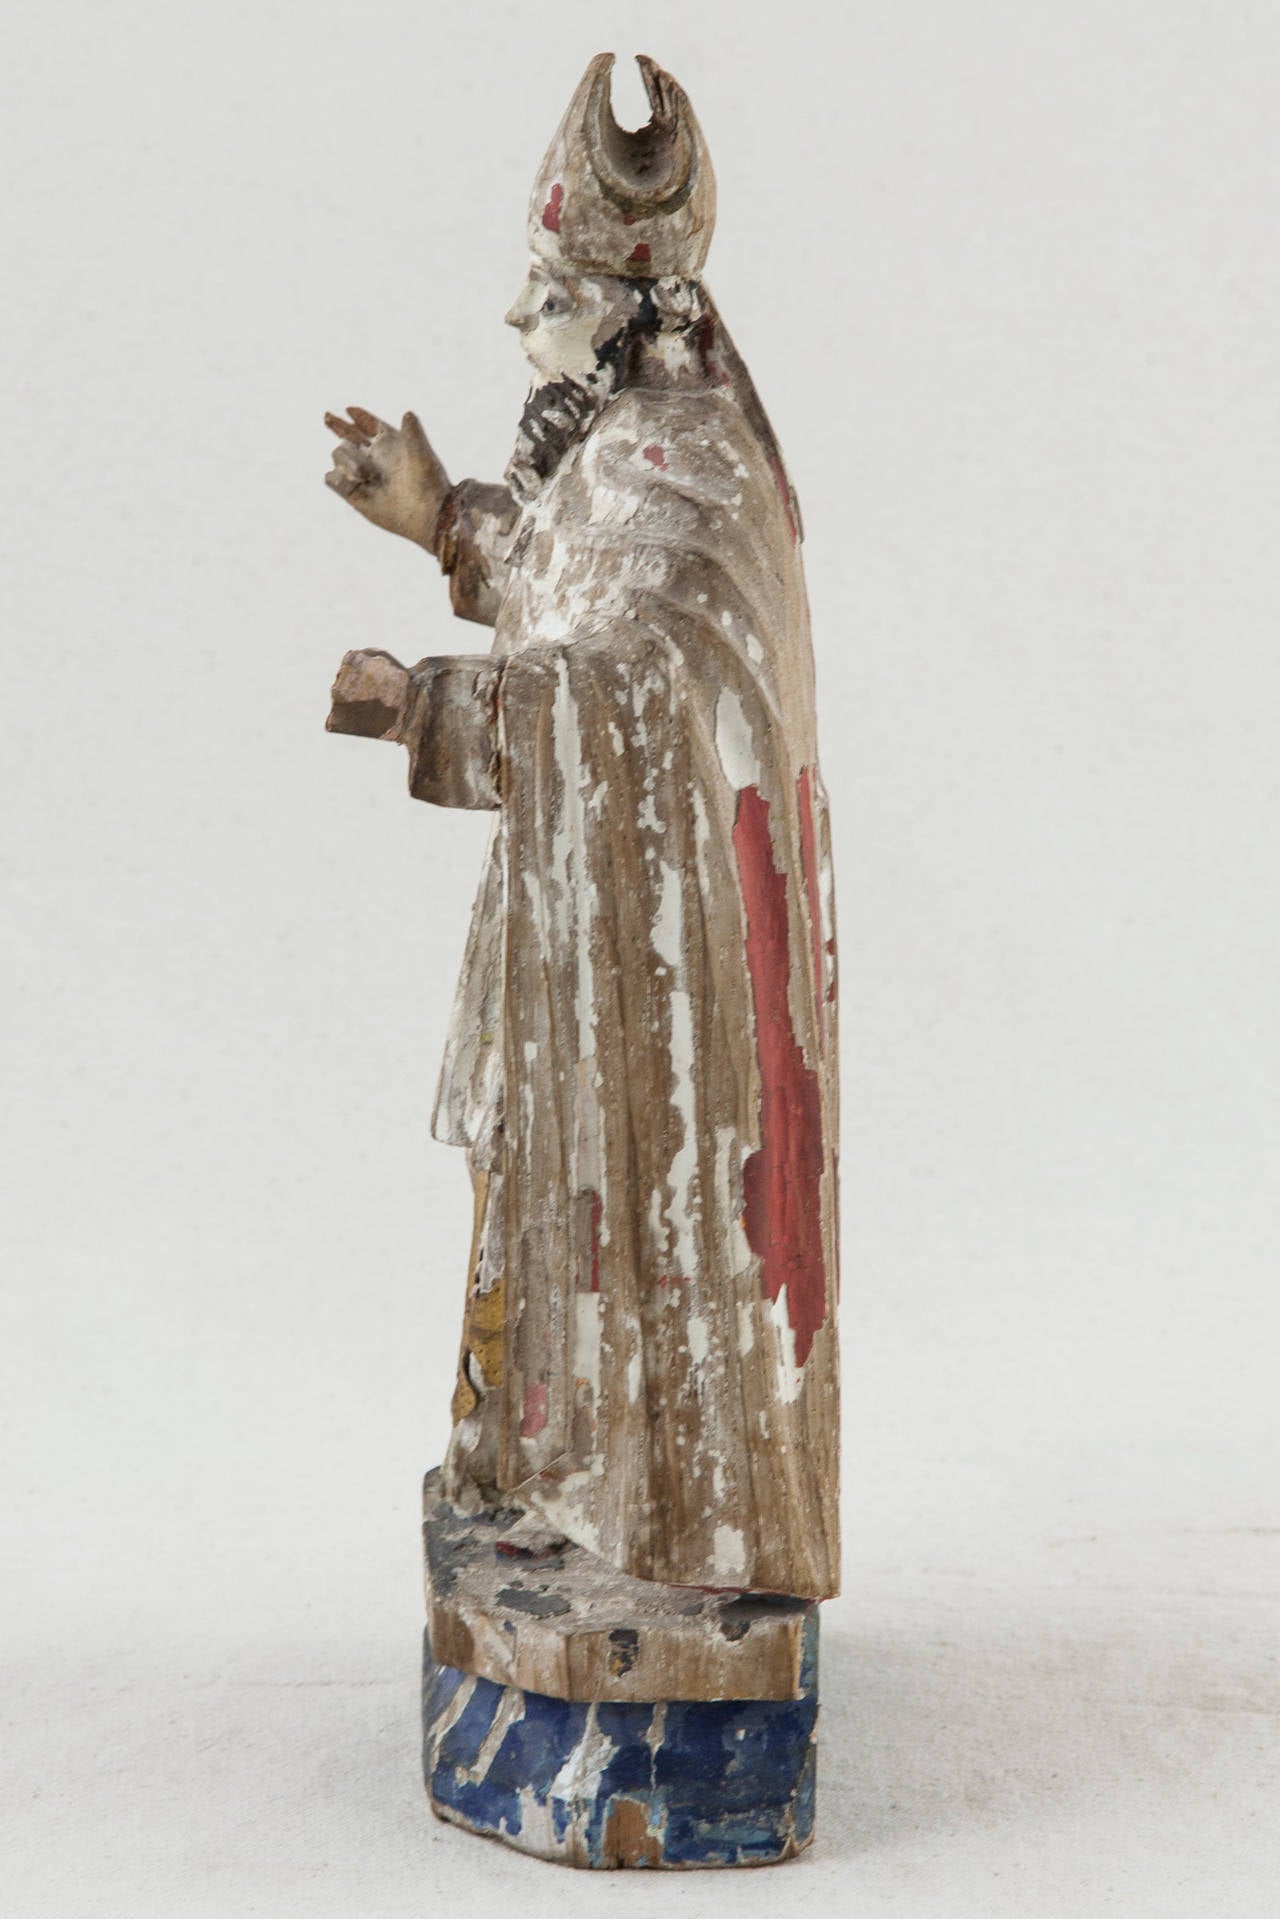 Created in the mid-1600s in France, this rare figure of a bishop with outstretched arms was originally finished in polychrome colors of ruby red and azure blue with gilt detail. In its beautifully aged state that only four centuries can bring and at